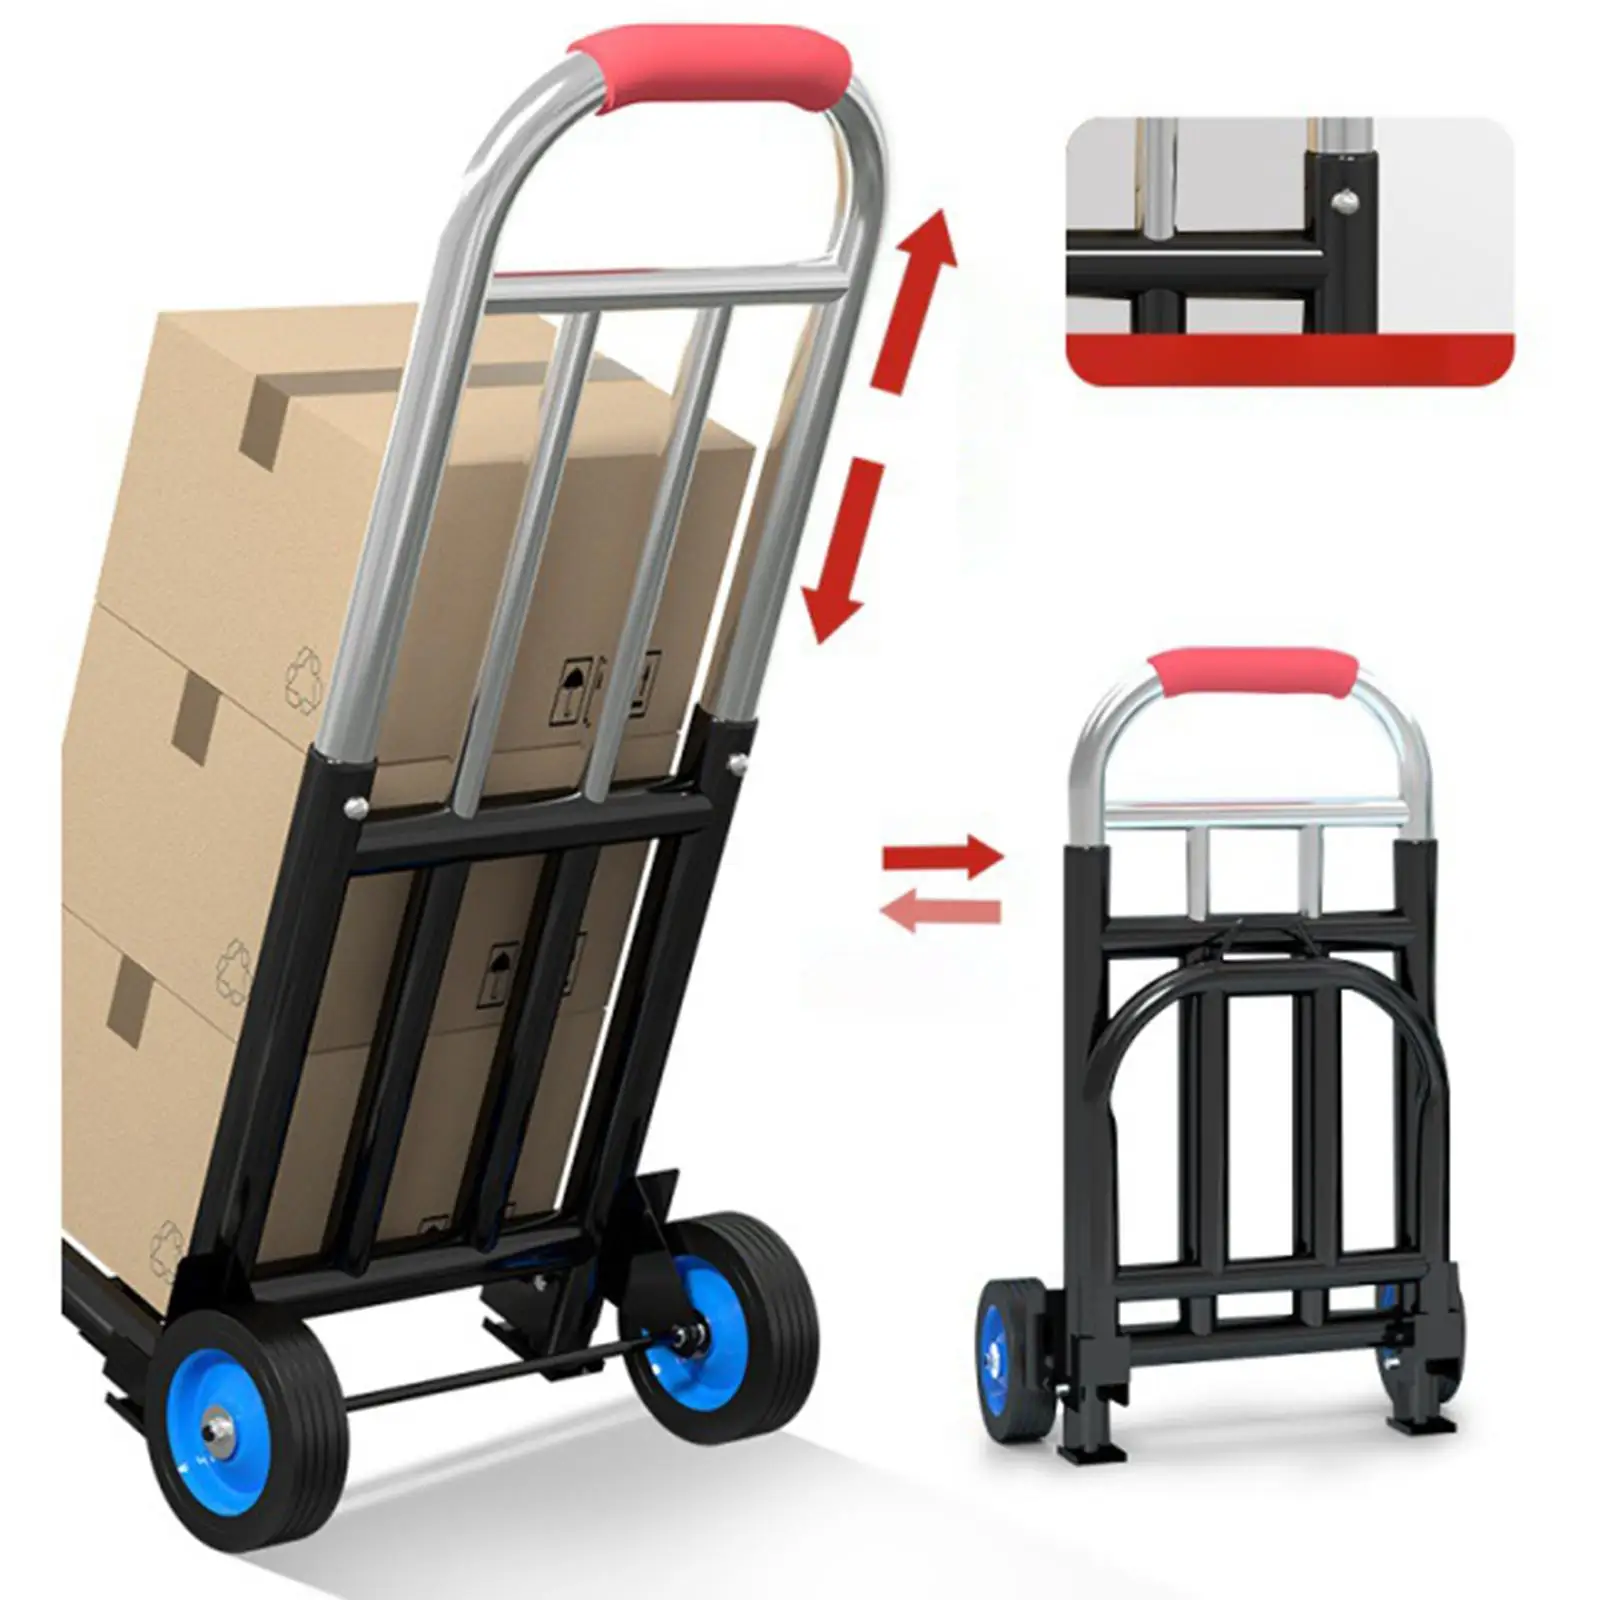 Folding Hand Truck Luggage Trolley Cart Telescoping Handle for Shopping